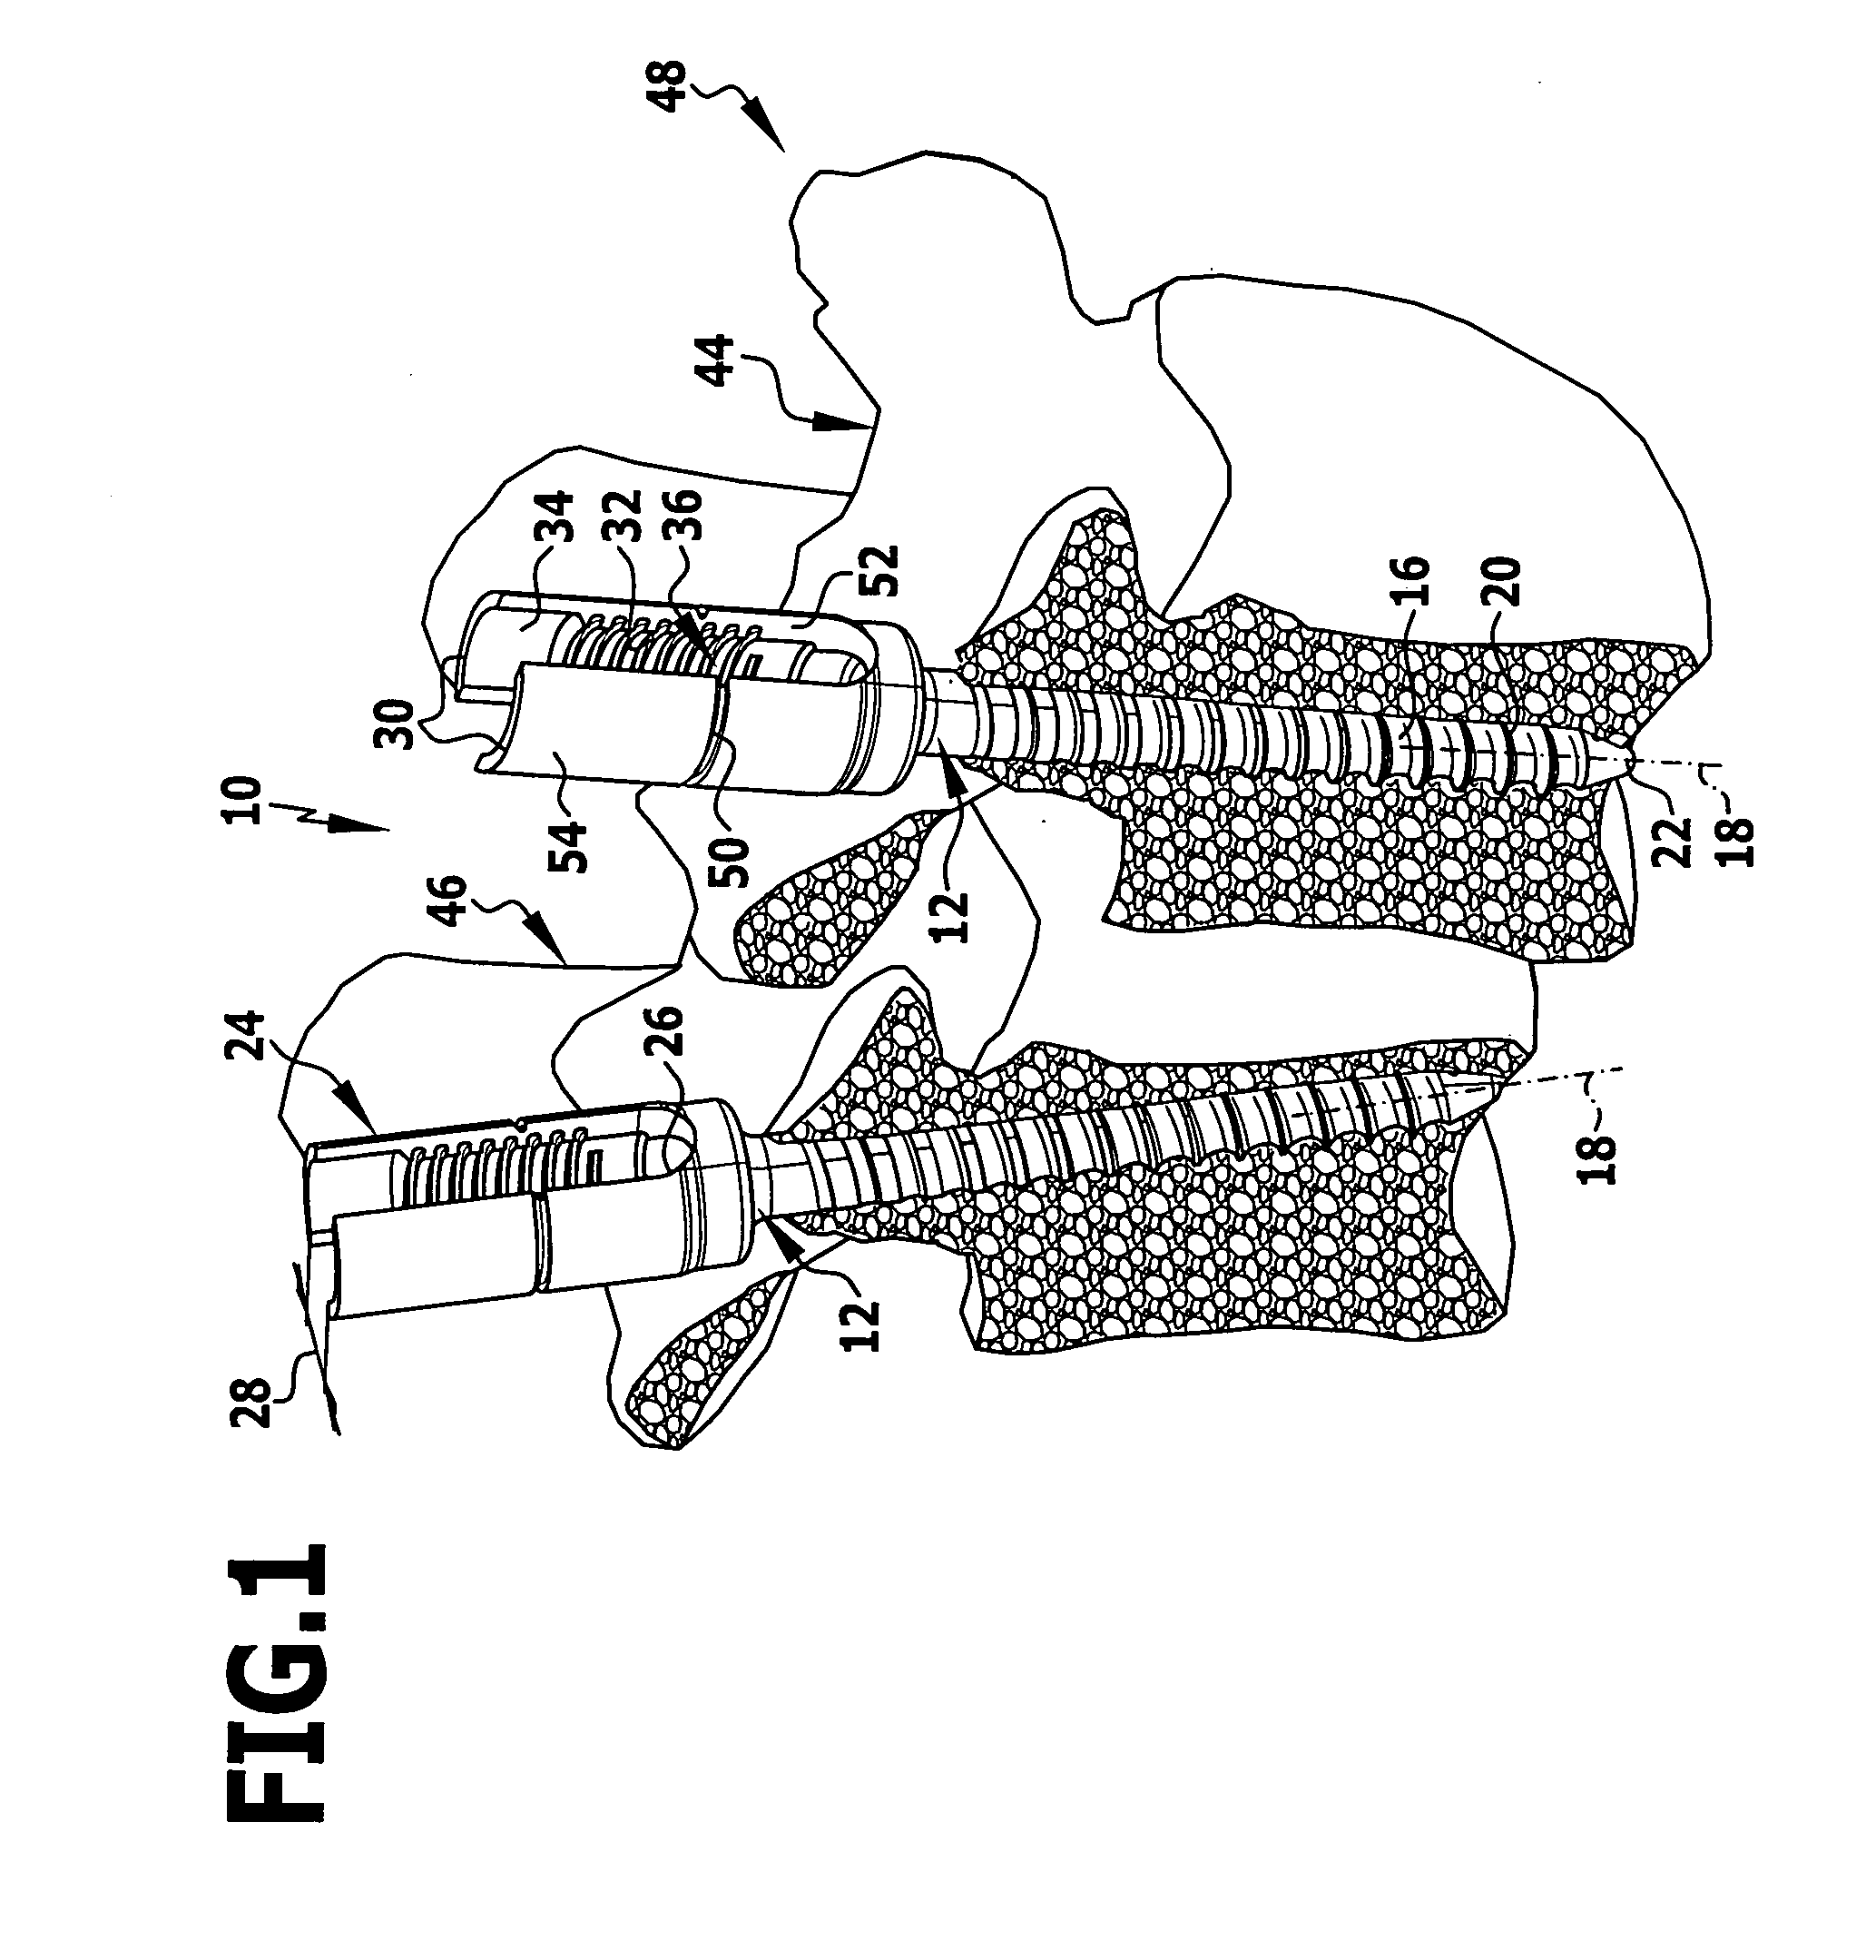 Surgical instrument and osteosynthesis device